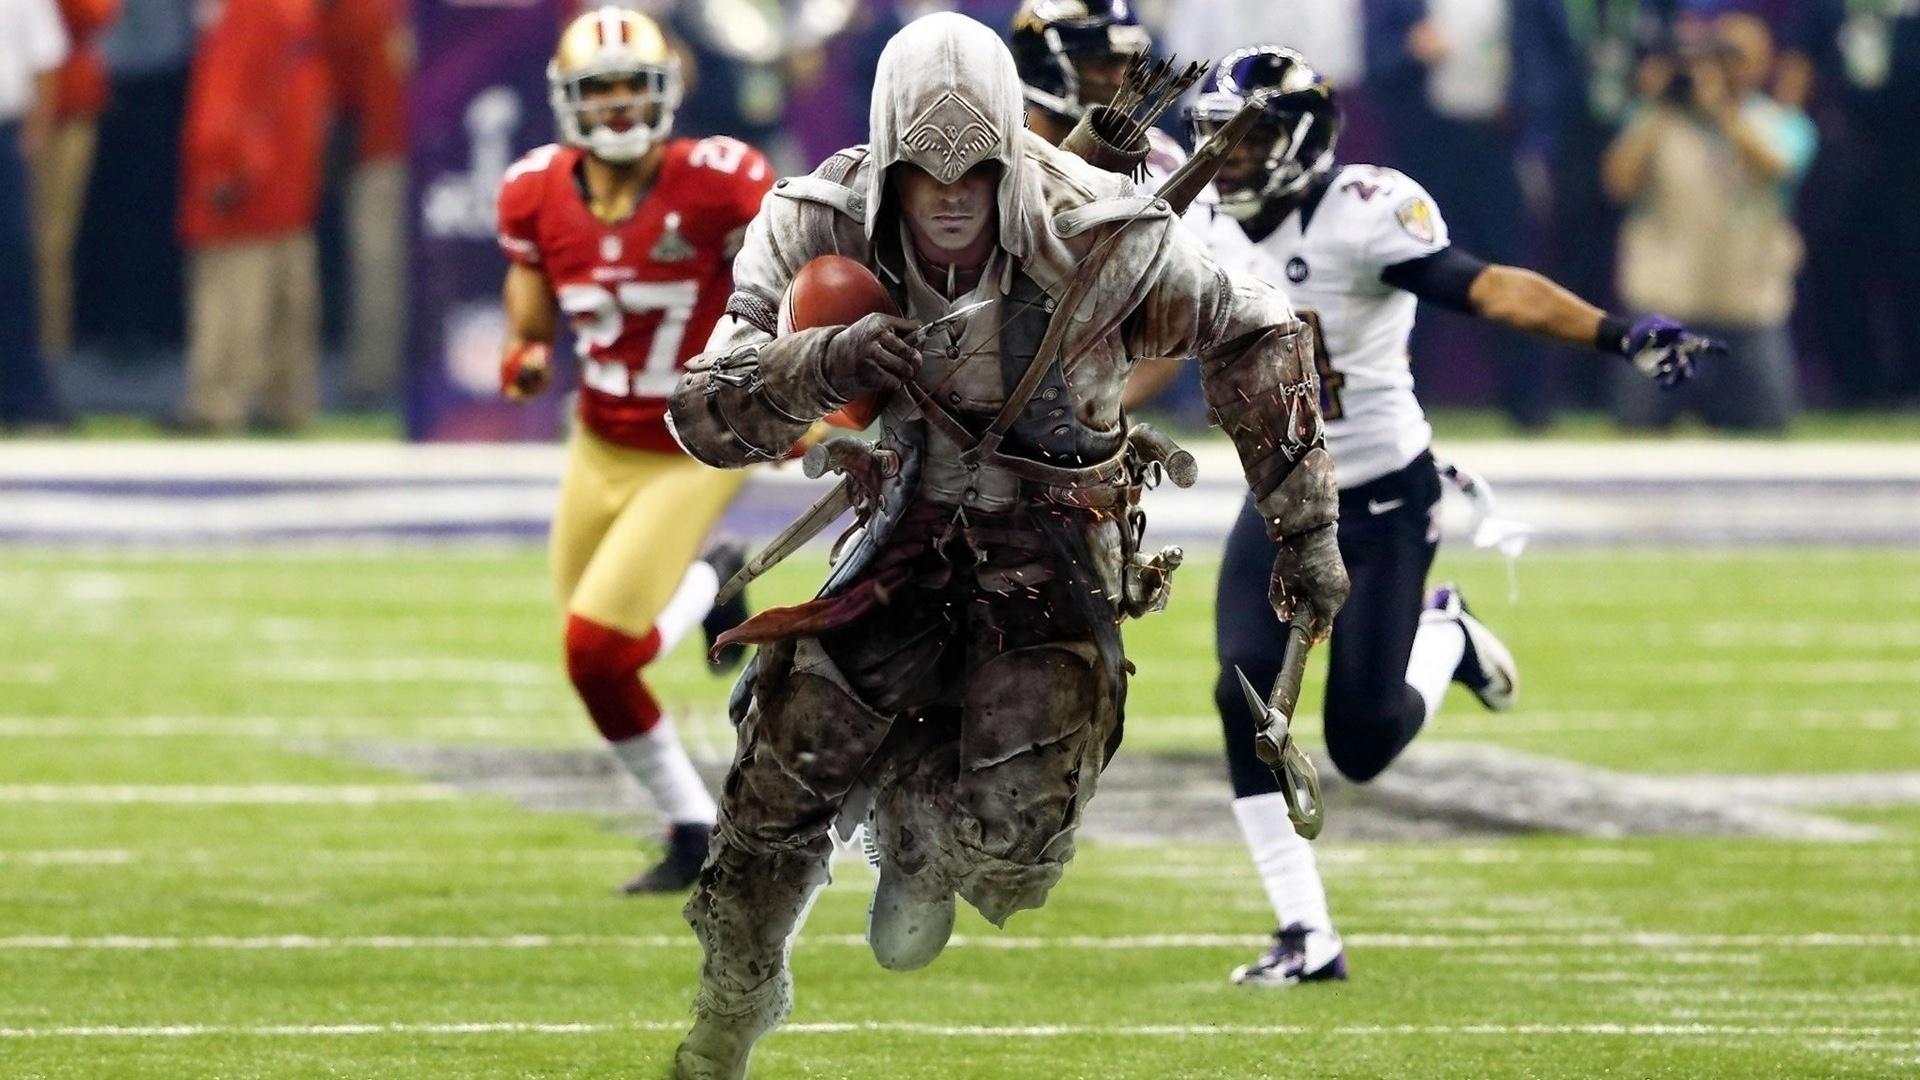 Assassin's Creed 4 Super Bowl Wallpaper in jpg format for free download